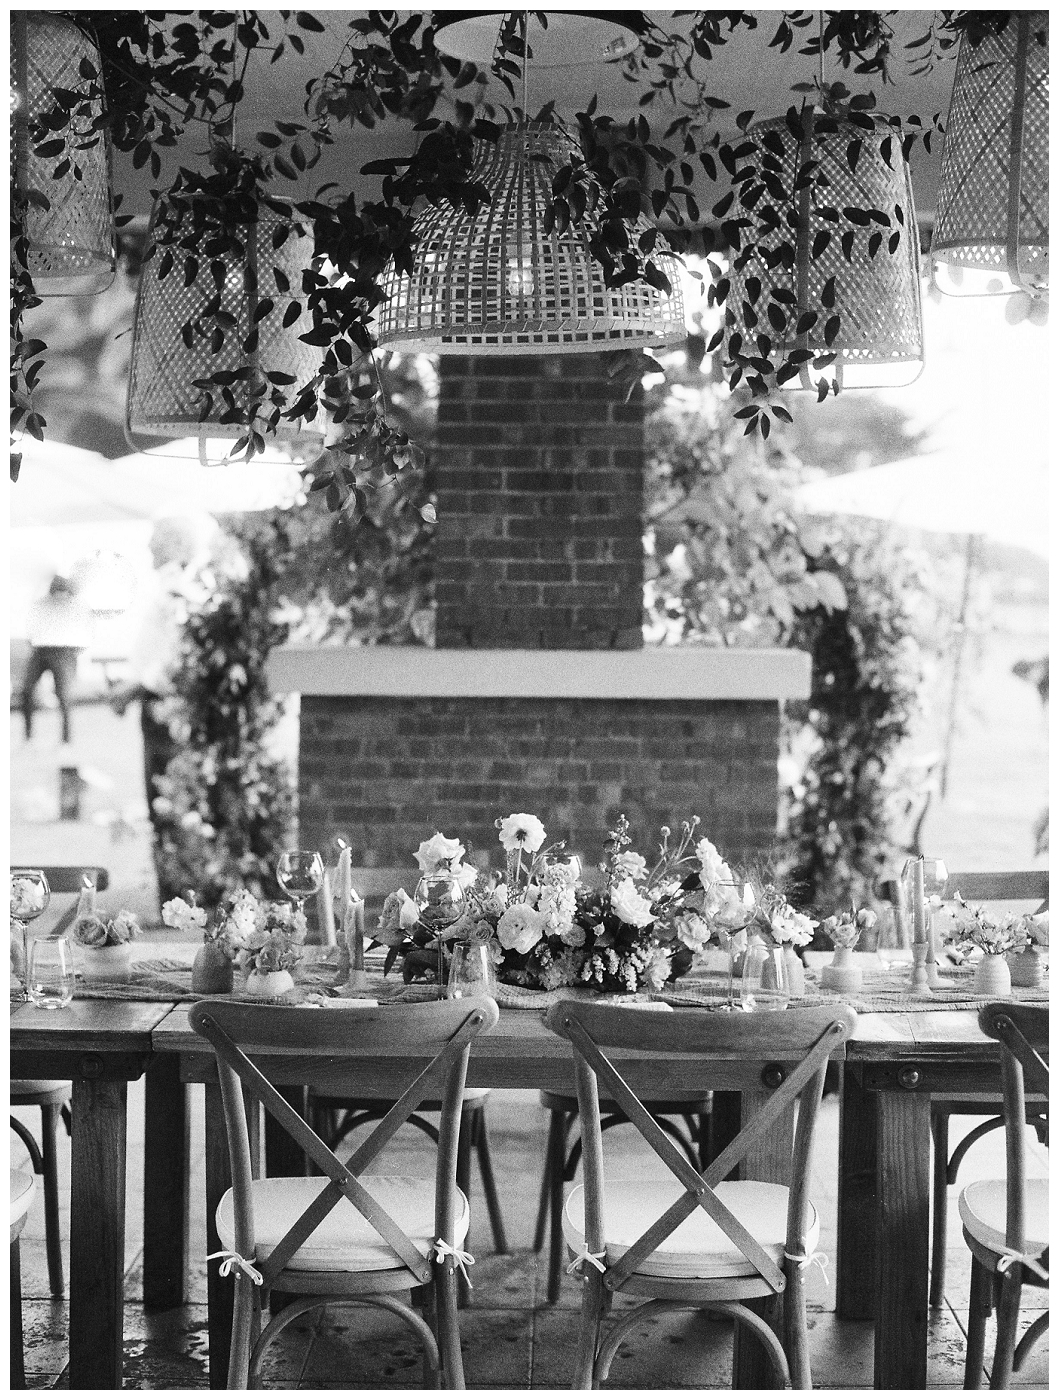 black and white photo of table with centerpiece and hanging greenery from lights at del mar surf station, farmhouse table, budvases ,outdoor reception, medium sized centerpieces, romantic weddings, daisies, toffee roses, berries, cream flowers, white flowers, hydrangeas, majolica roses, explosion grass, outdoor wedding, covid wedding, san diego wedding florist, southern california elopement florist, socal florist, best wedding florist san diego ca, best wedding florist southern california, los angeles wedding florist, top rated wedding florist in california, del mar san diego, blush tapered candles, blush table runner, budvases